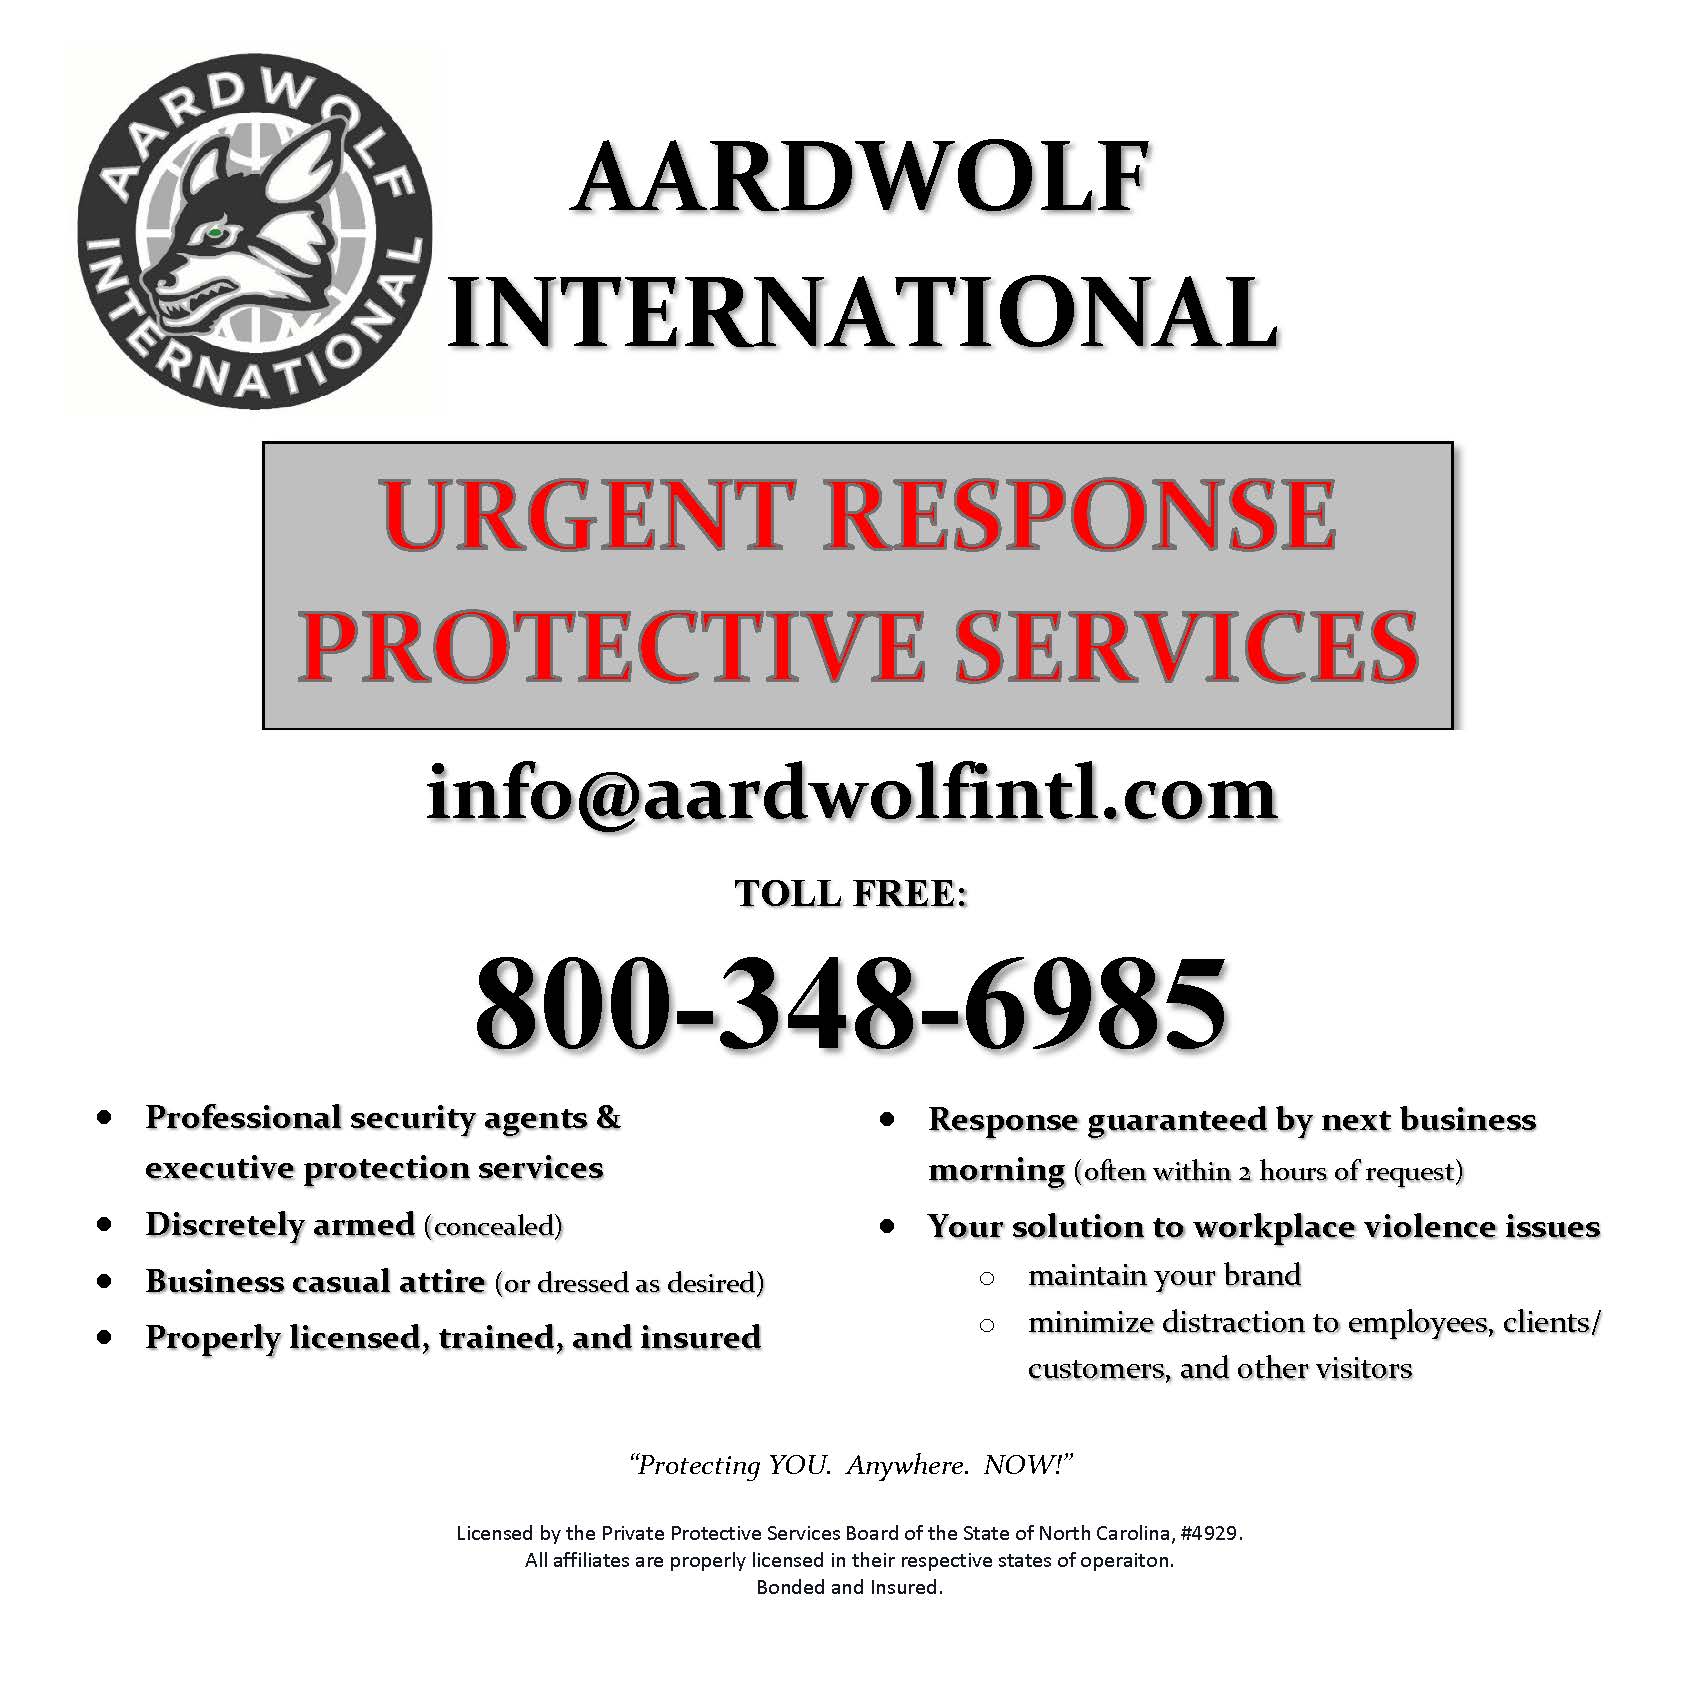 Executive Protection and Urgent Response Armed and Discrete Protective Services for the Workplace